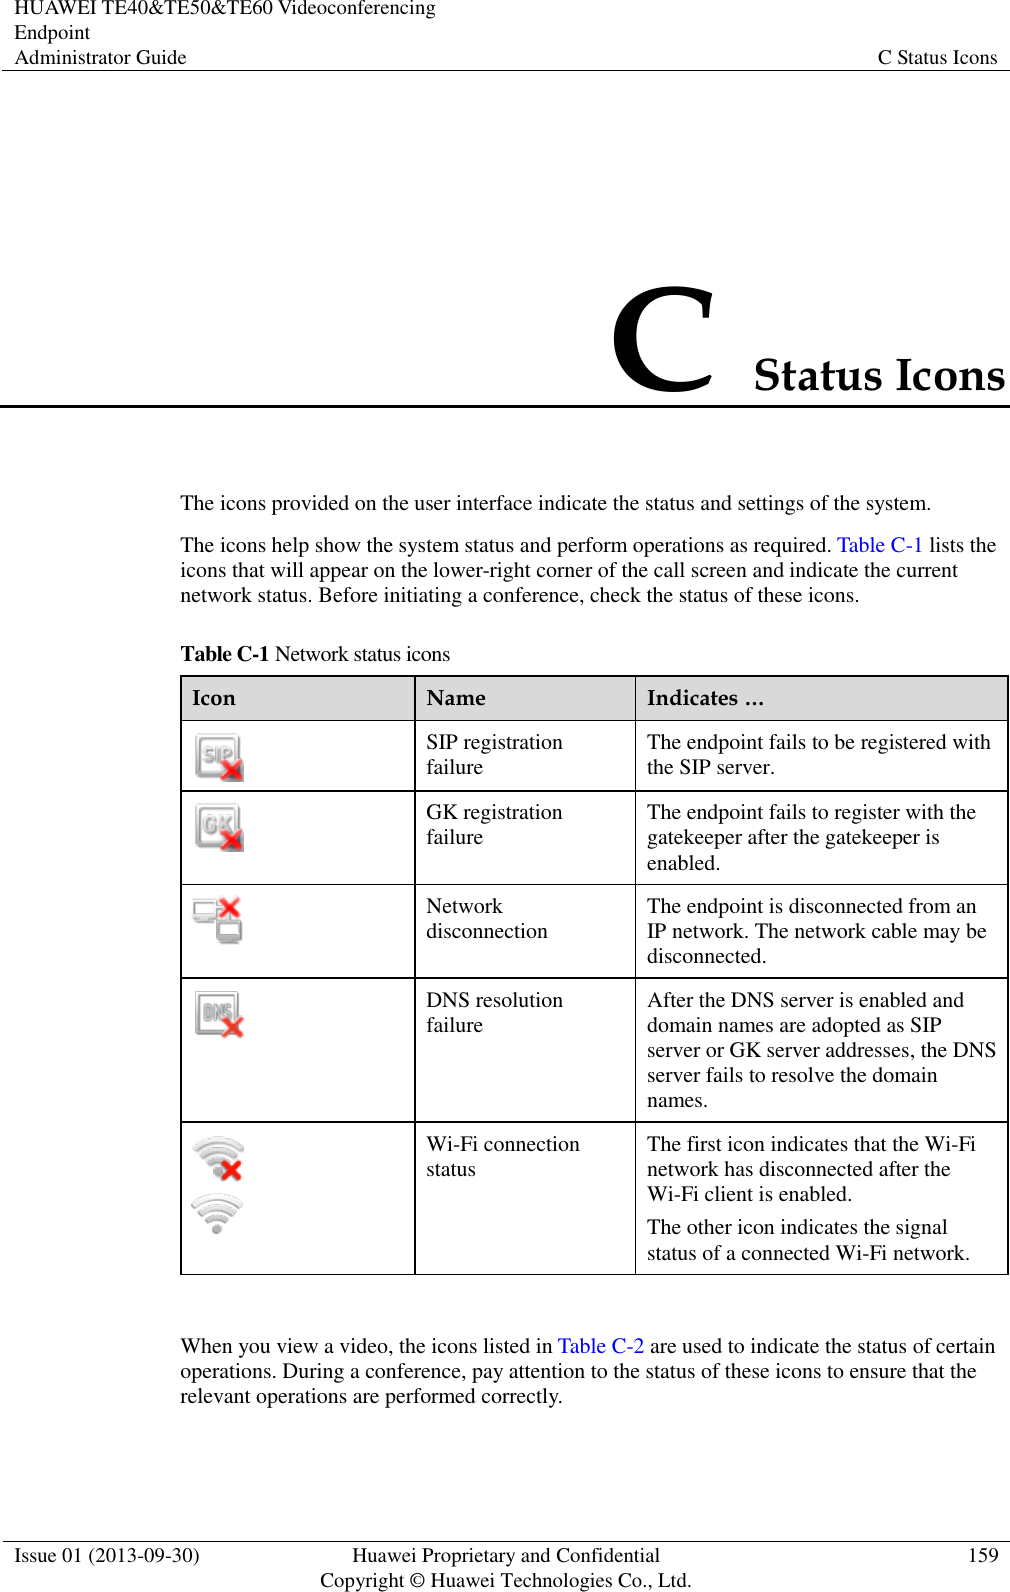 HUAWEI TE40&amp;TE50&amp;TE60 Videoconferencing Endpoint Administrator Guide C Status Icons  Issue 01 (2013-09-30) Huawei Proprietary and Confidential                                     Copyright © Huawei Technologies Co., Ltd. 159  C Status Icons The icons provided on the user interface indicate the status and settings of the system. The icons help show the system status and perform operations as required. Table C-1 lists the icons that will appear on the lower-right corner of the call screen and indicate the current network status. Before initiating a conference, check the status of these icons. Table C-1 Network status icons Icon Name Indicates …  SIP registration failure The endpoint fails to be registered with the SIP server.  GK registration failure The endpoint fails to register with the gatekeeper after the gatekeeper is enabled.  Network disconnection The endpoint is disconnected from an IP network. The network cable may be disconnected.  DNS resolution failure After the DNS server is enabled and domain names are adopted as SIP server or GK server addresses, the DNS server fails to resolve the domain names.   Wi-Fi connection status The first icon indicates that the Wi-Fi network has disconnected after the Wi-Fi client is enabled. The other icon indicates the signal status of a connected Wi-Fi network.  When you view a video, the icons listed in Table C-2 are used to indicate the status of certain operations. During a conference, pay attention to the status of these icons to ensure that the relevant operations are performed correctly. 